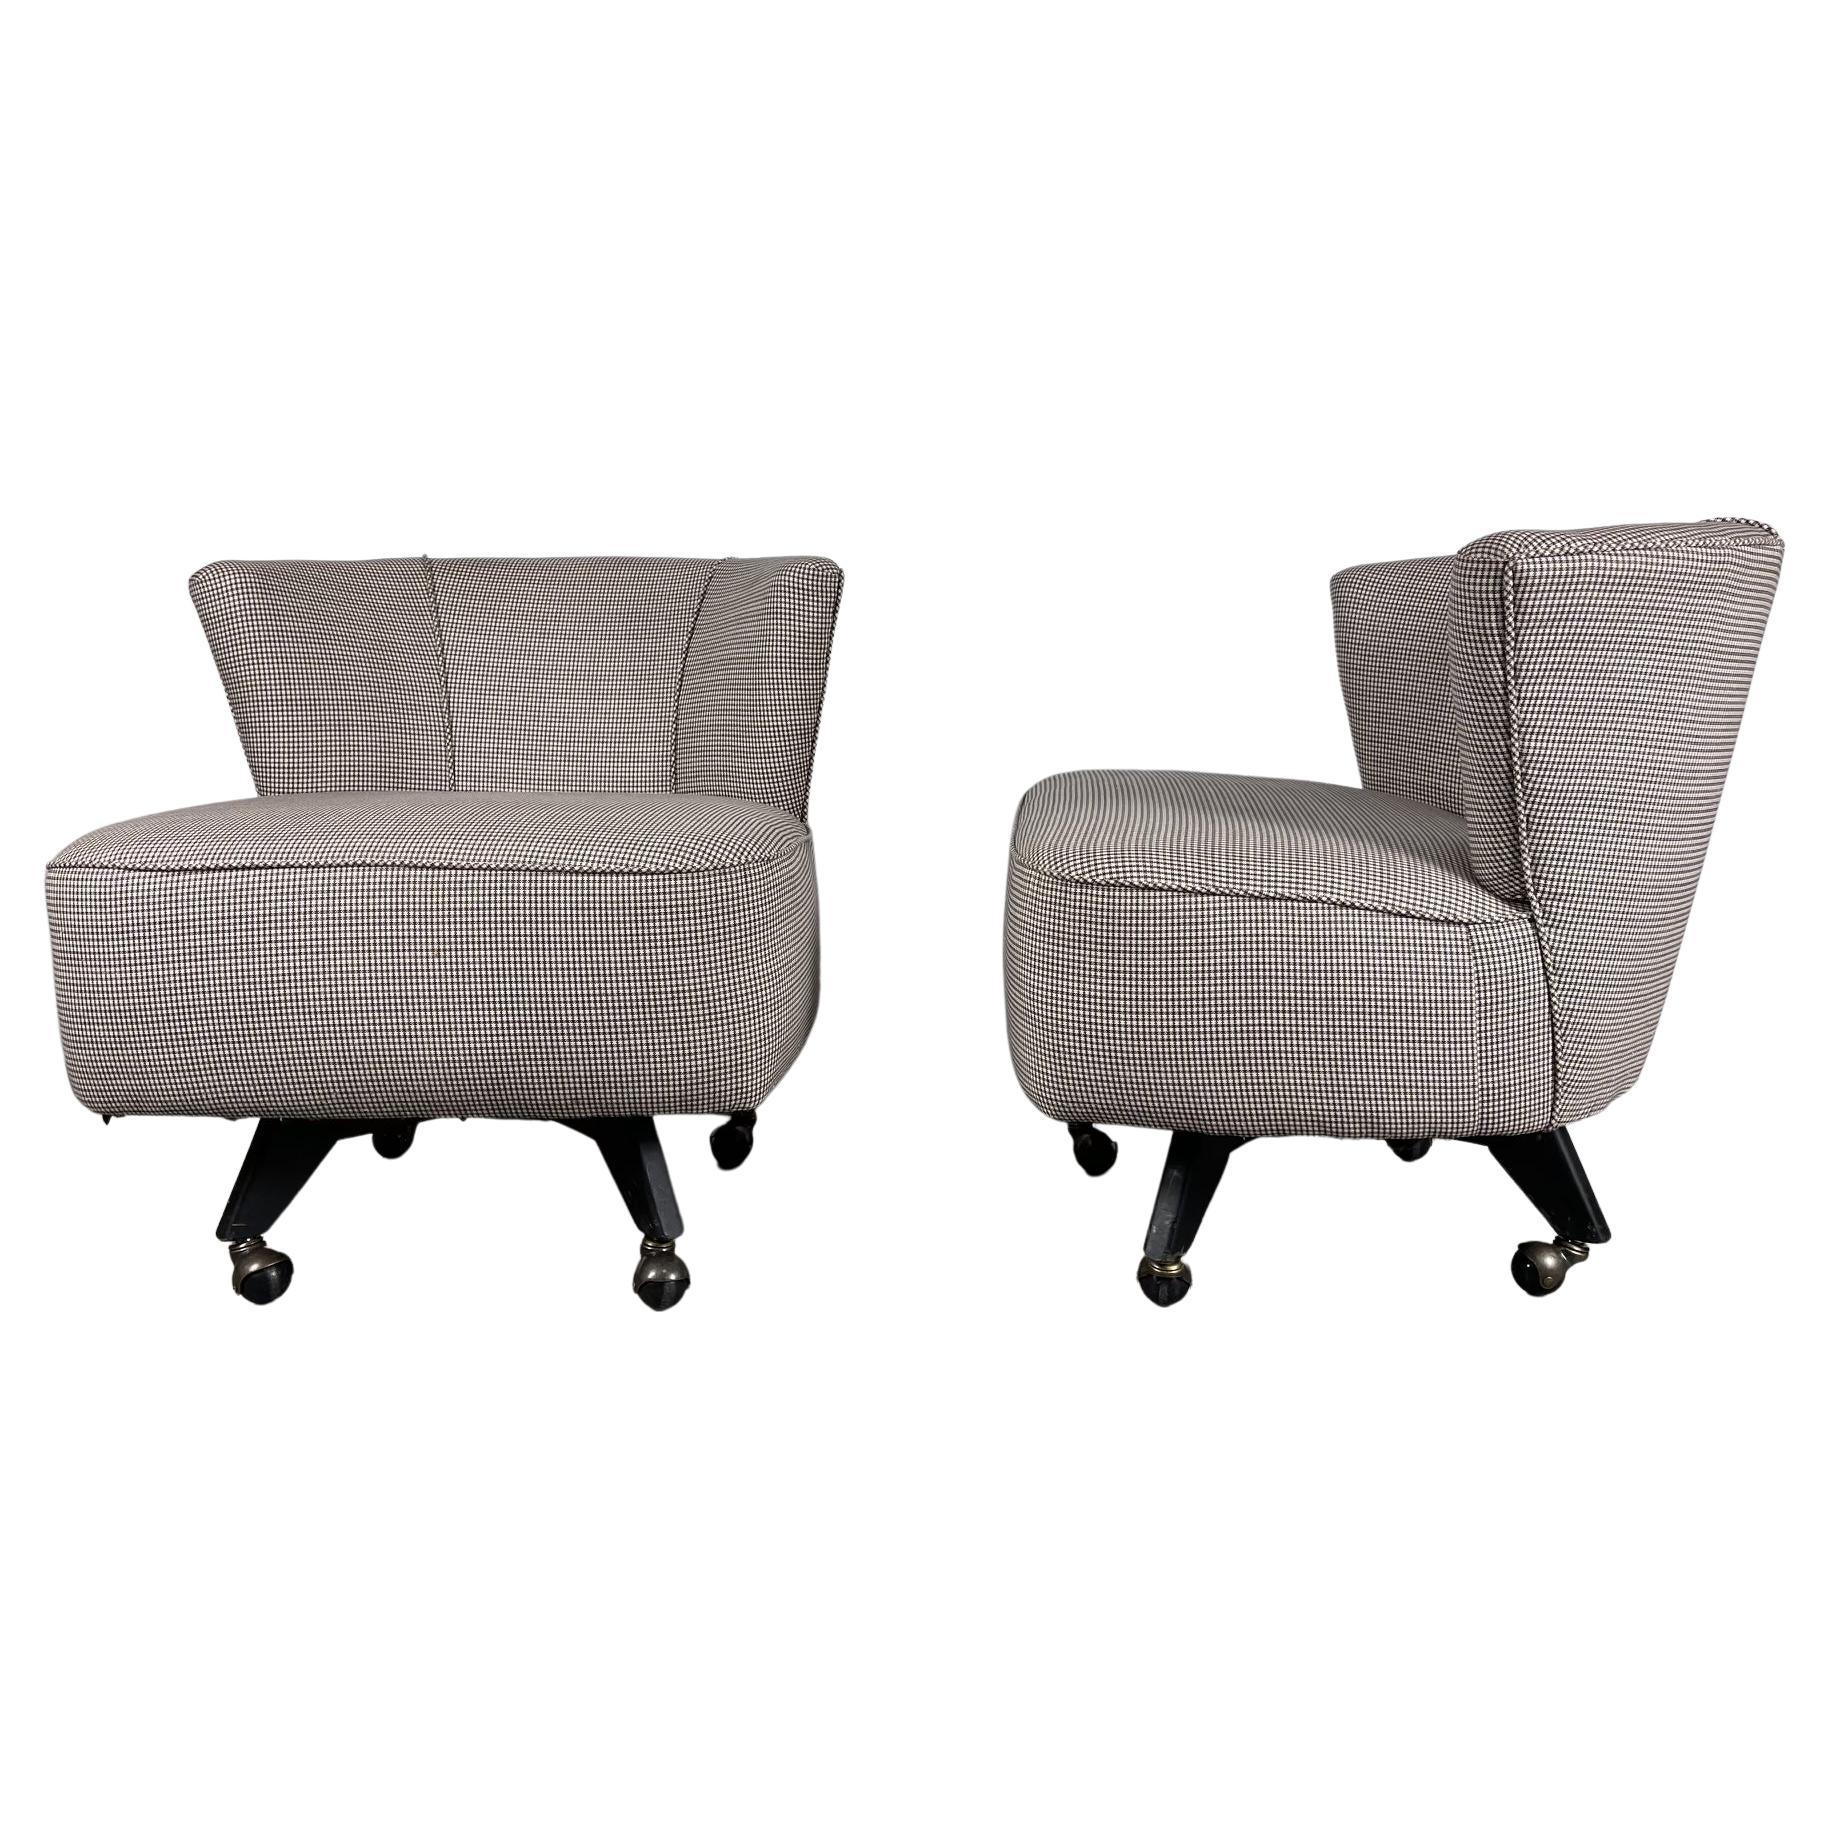 Classic Pair Mid-Century Modern Swivel Chairs on castors, , attrib to Selig For Sale